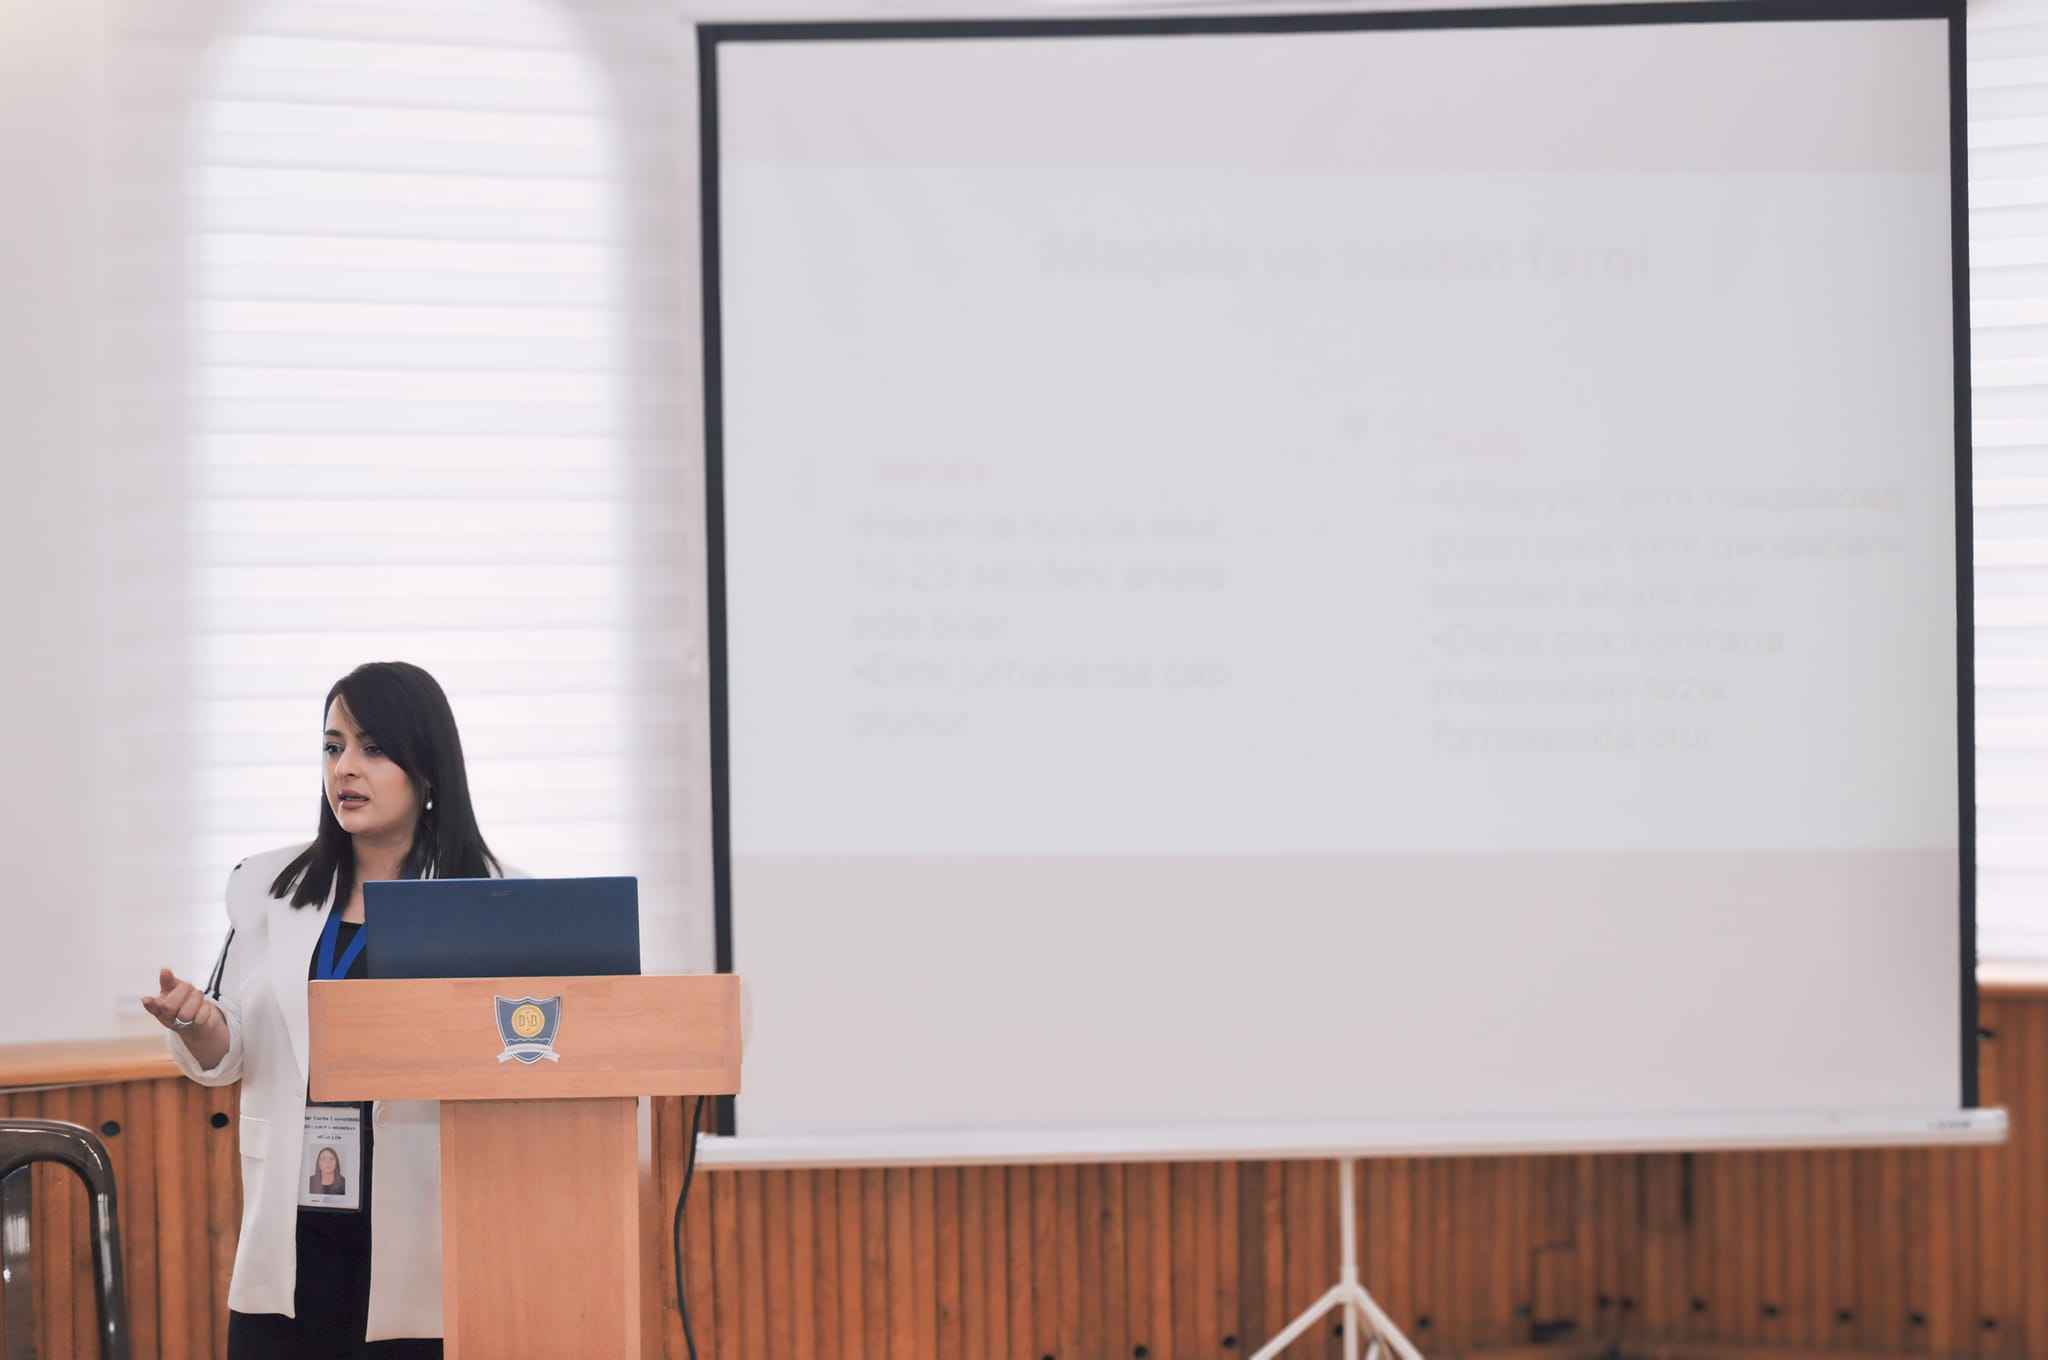 A practical training called "Scientific Stylistics" was held at OYU